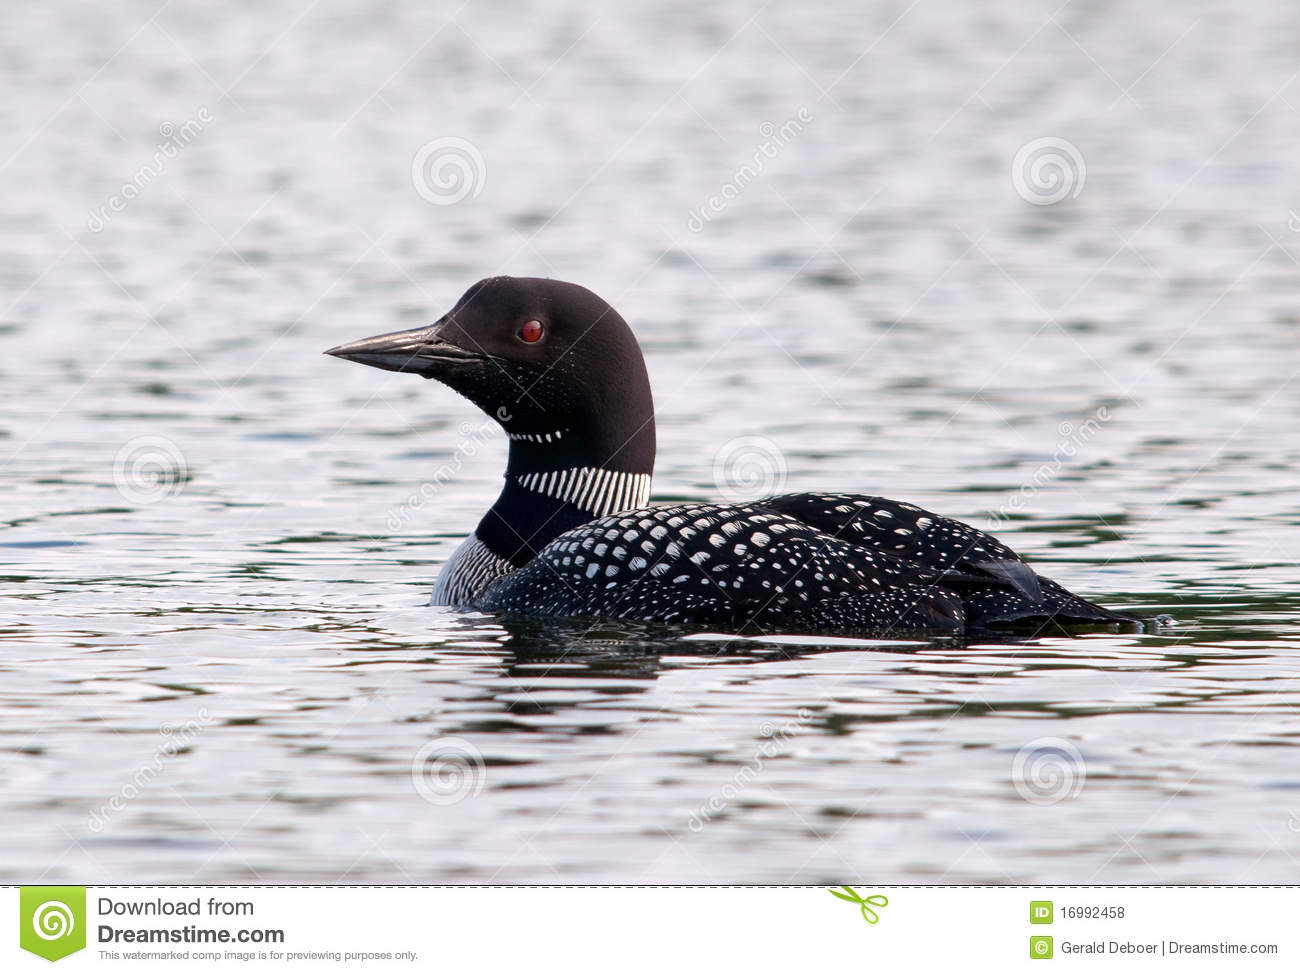 Photograph Of An Adult Common Loon Surveying His Lake While Swimming    